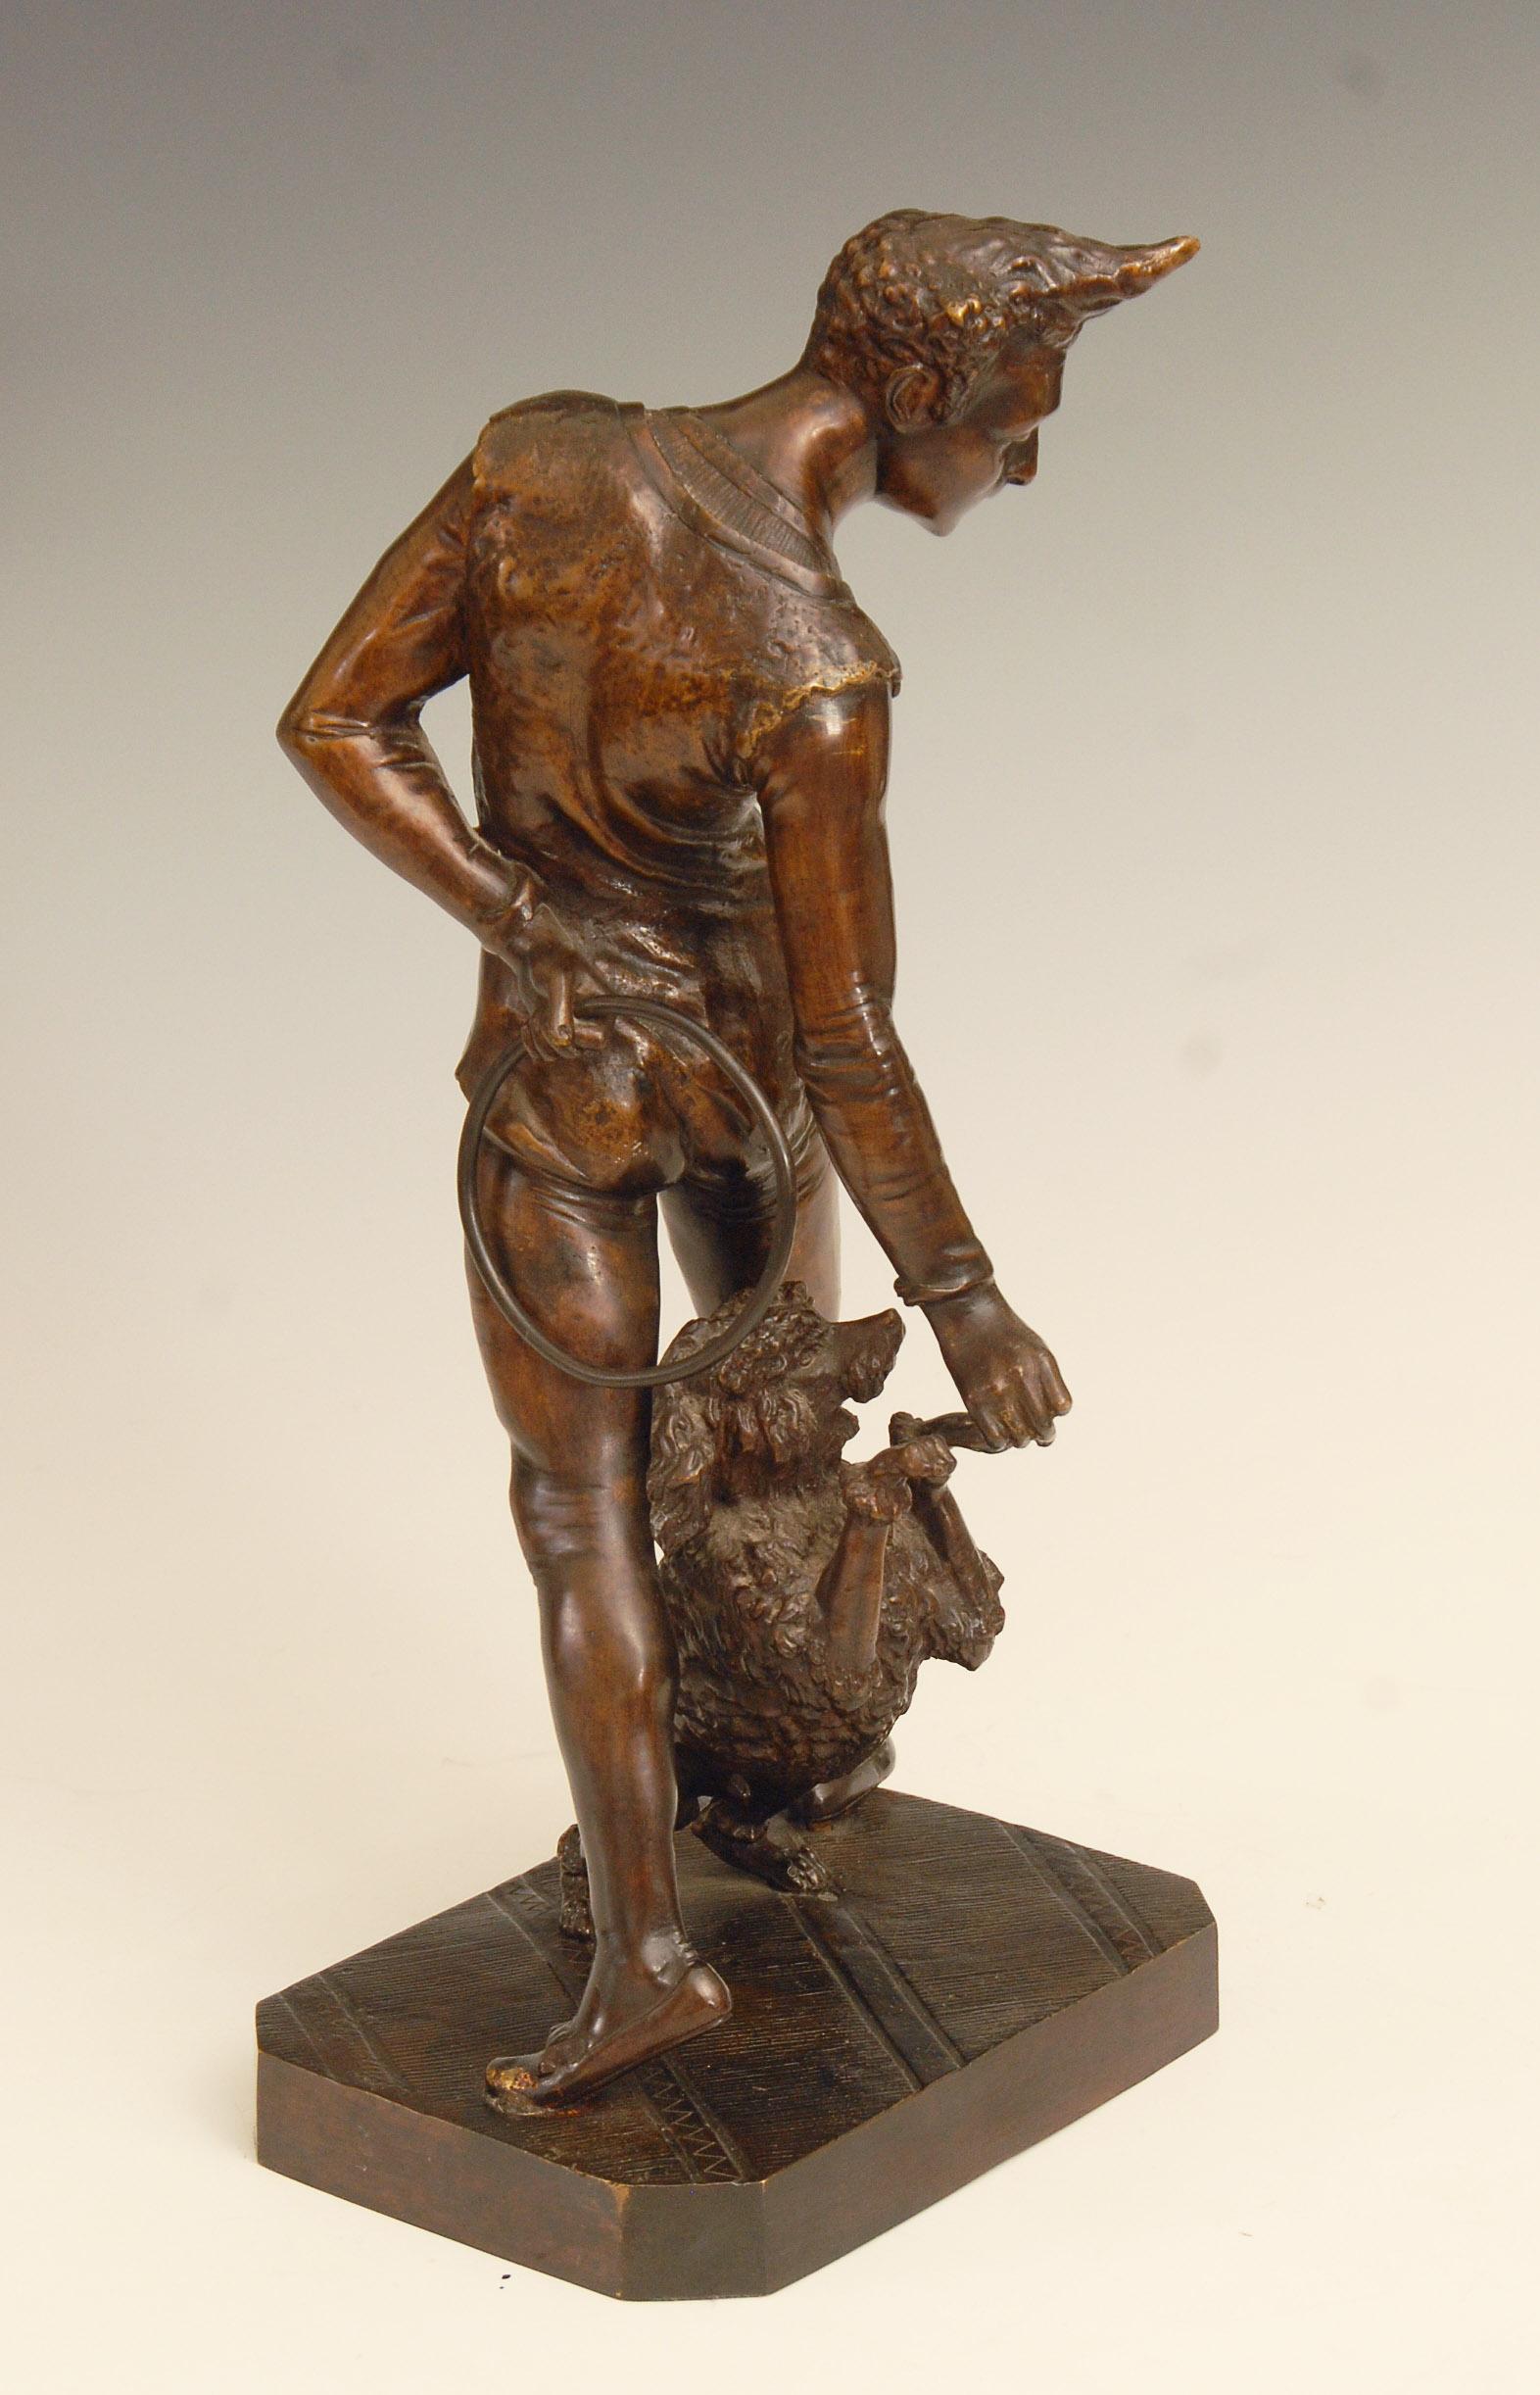 Charming late 19th century French patinated bronze study of a clown playing with his performing poodle by George de Chemellier.

15.5 inches high, weighing approx 13 lbs / 6 kg.
Price includes free shipping to anywhere in the world.